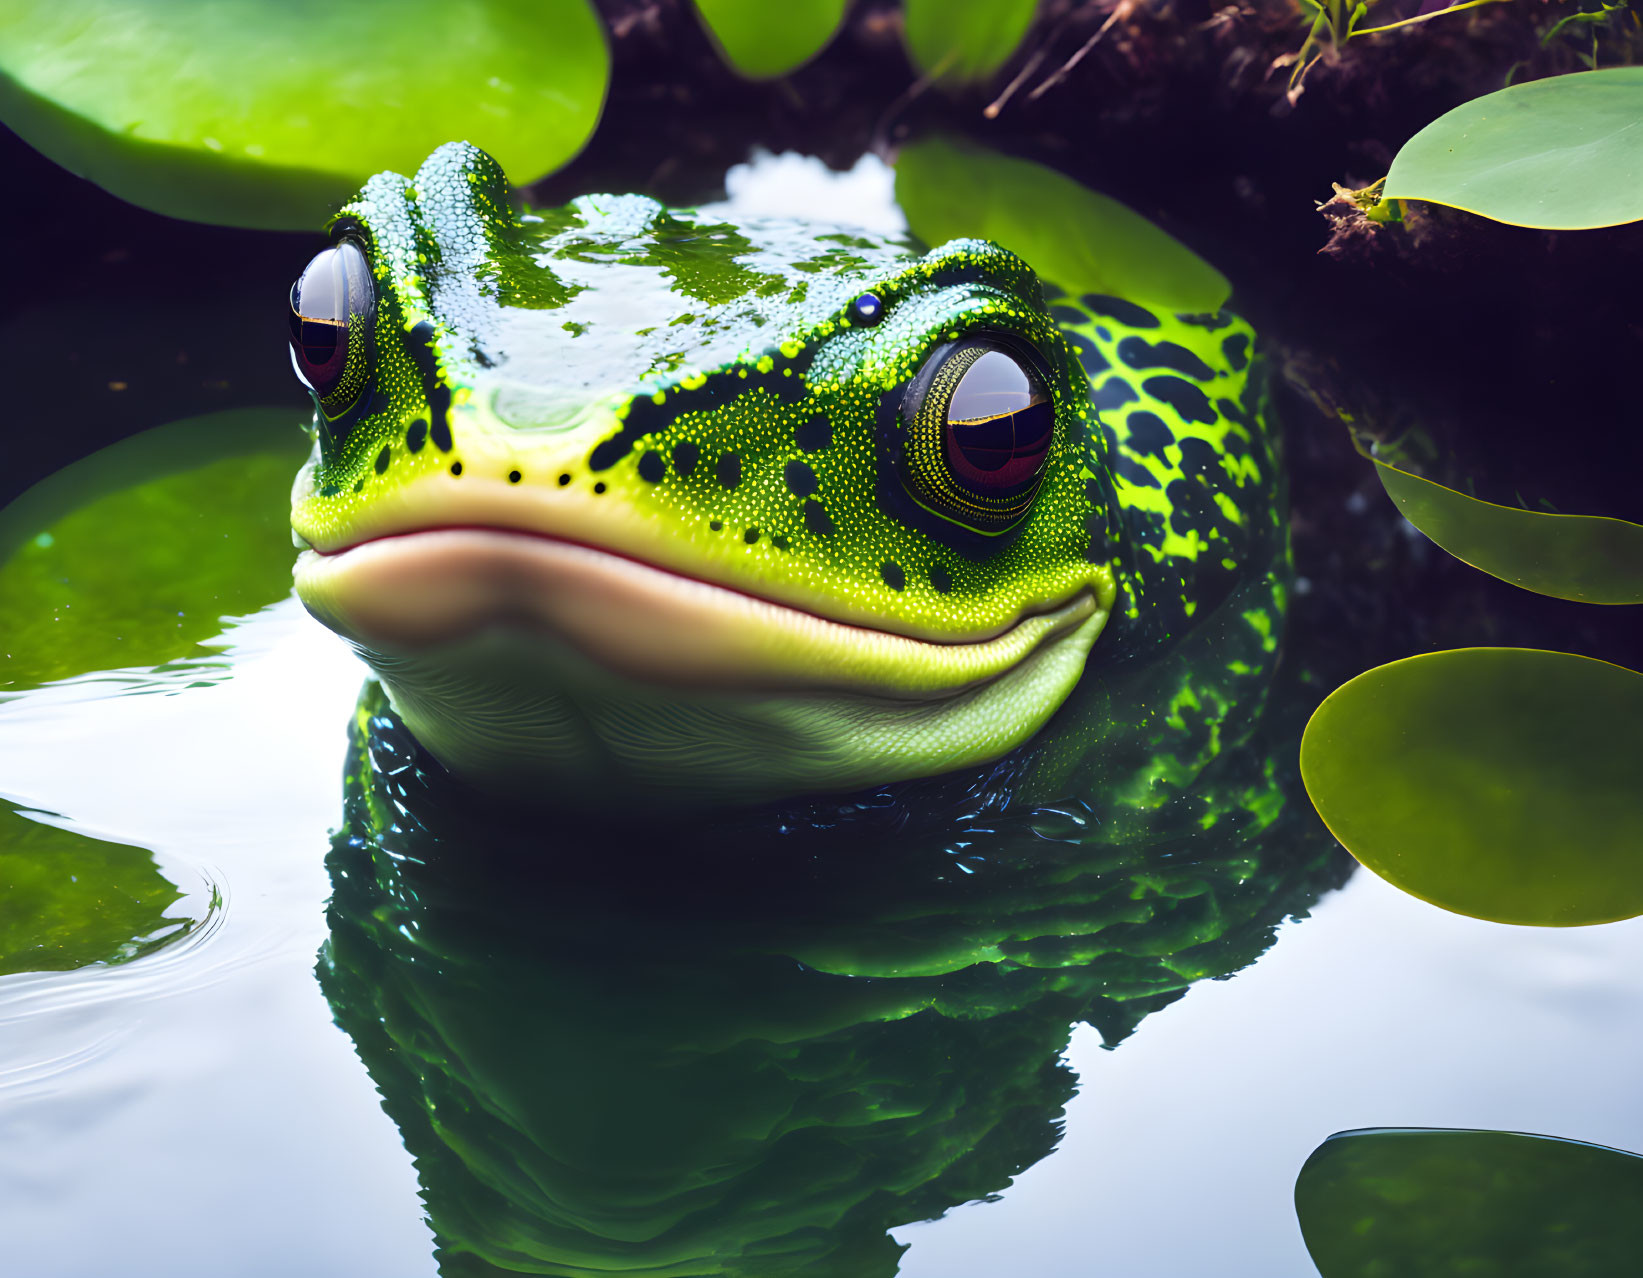 Vibrant green frog with red eyes among lily pads